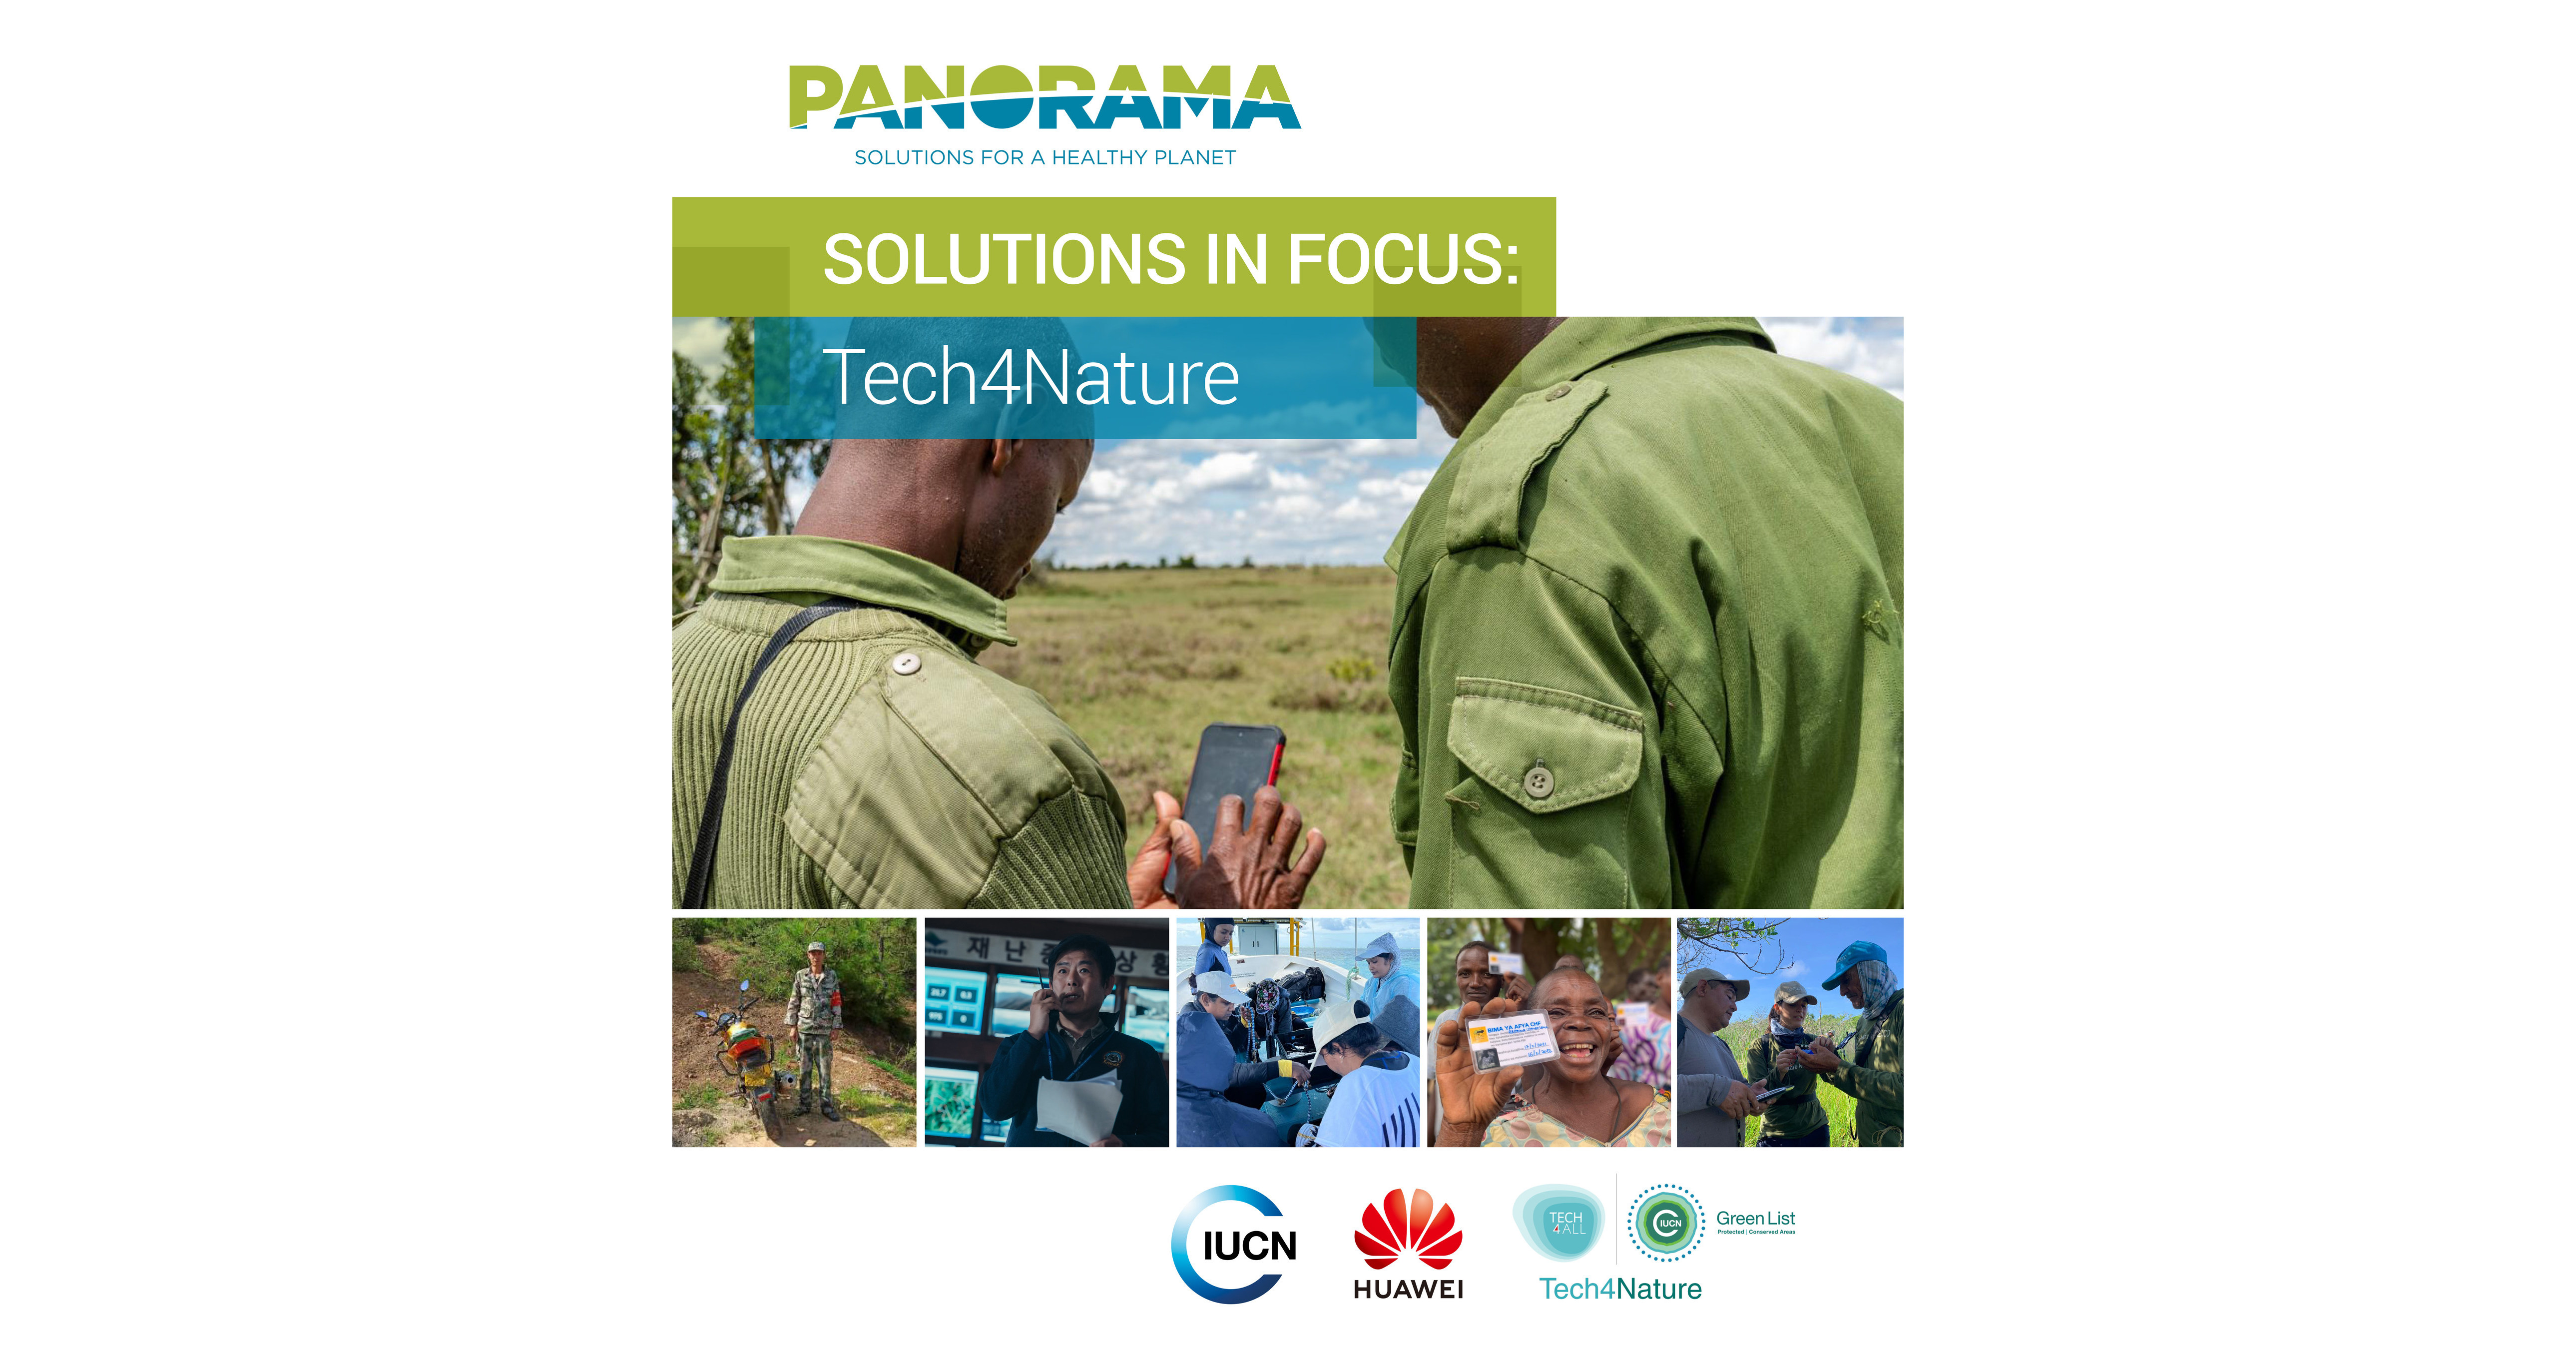 IUCN and Huawei Launch Tech4Nature Publication to Showcase Best Practices in Technology-based Nature Conservation USA